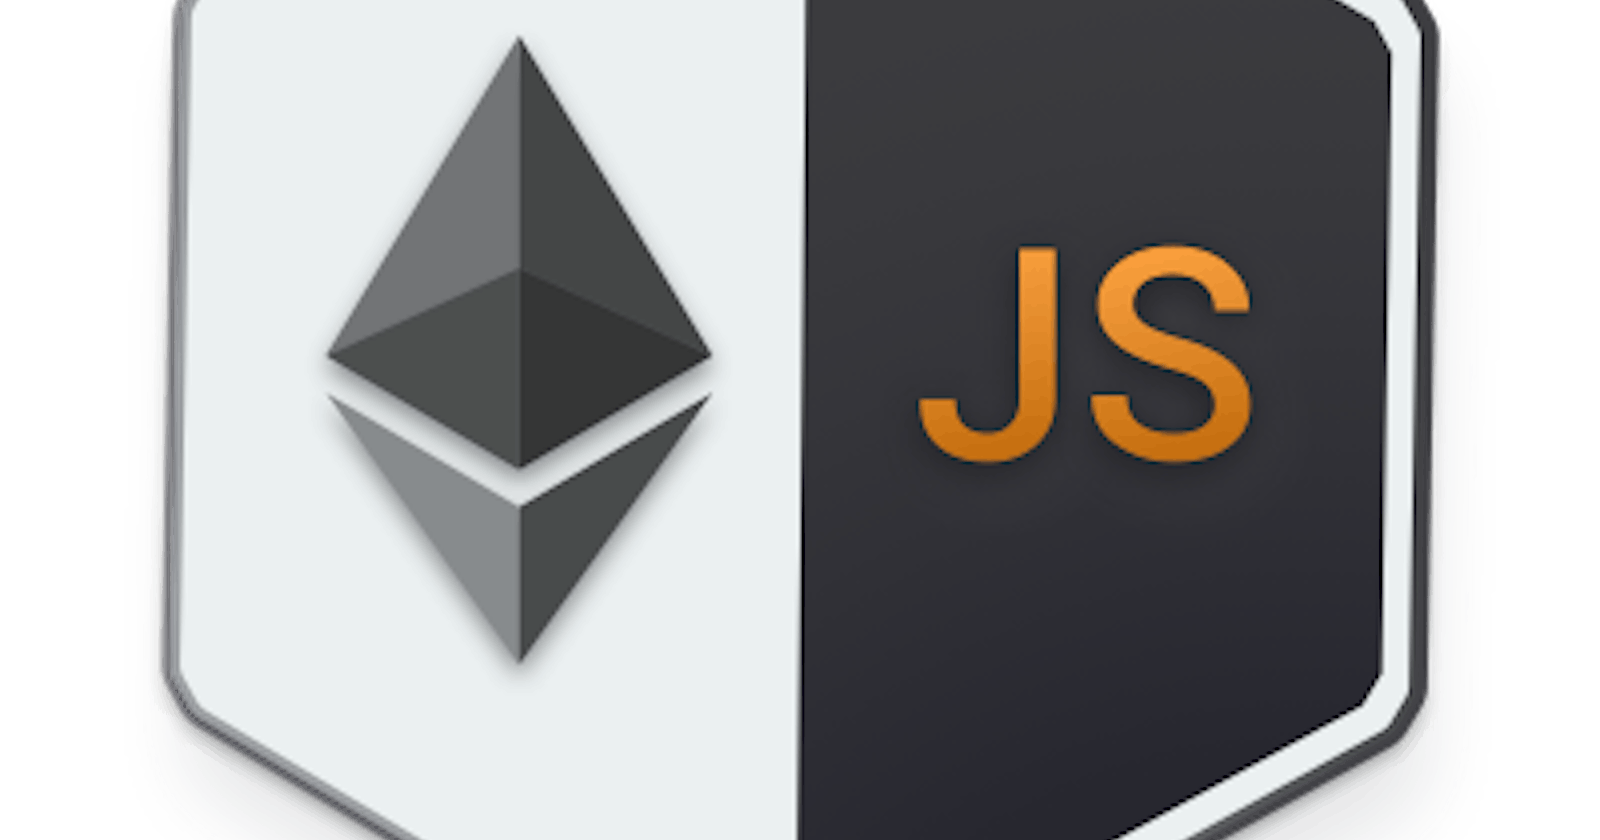 SET UP WEB3.JS TO USE THE ETHEREUM BLOCKCHAIN IN JAVASCRIPT